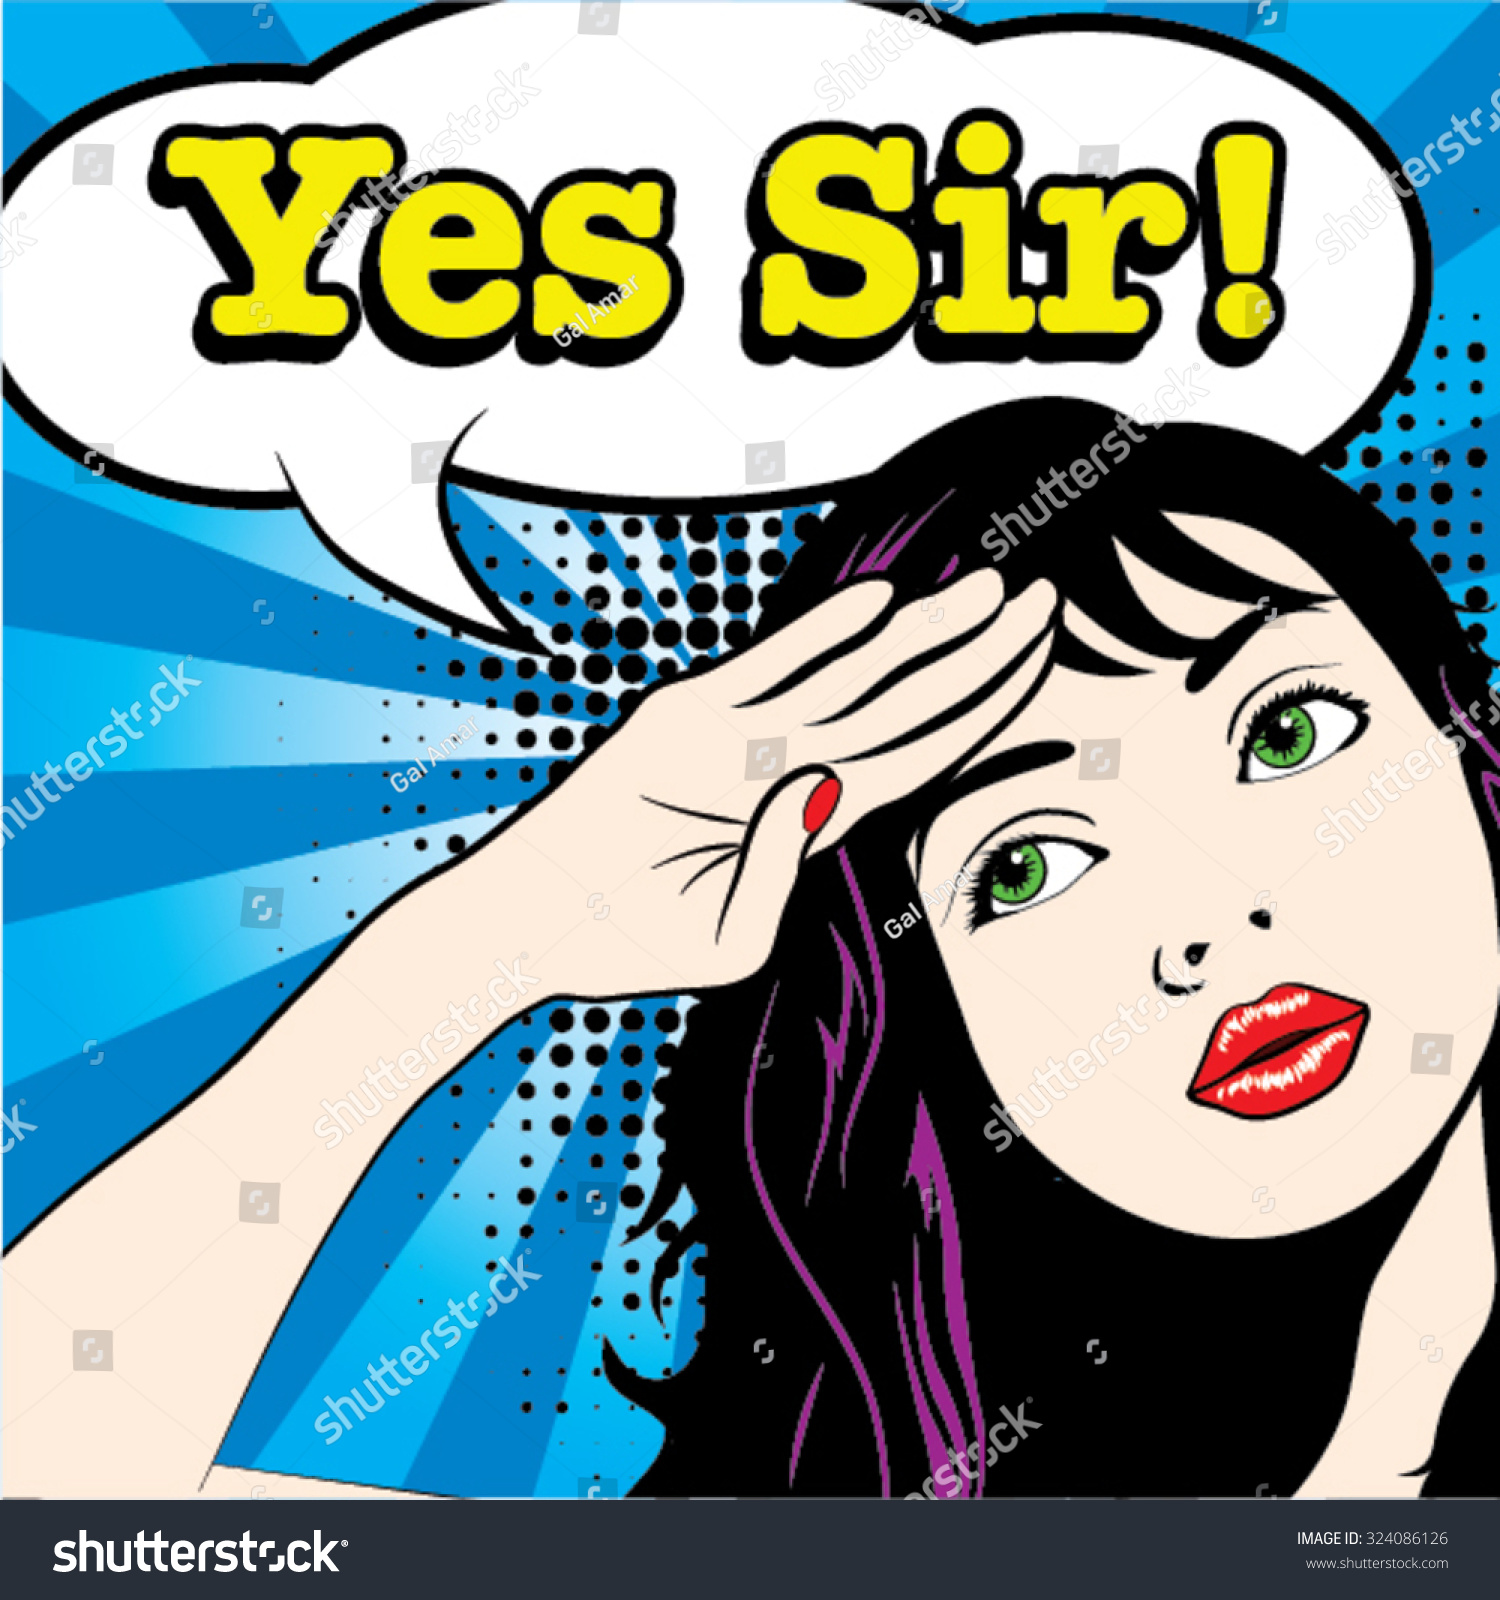 yes sir clipart - photo #11